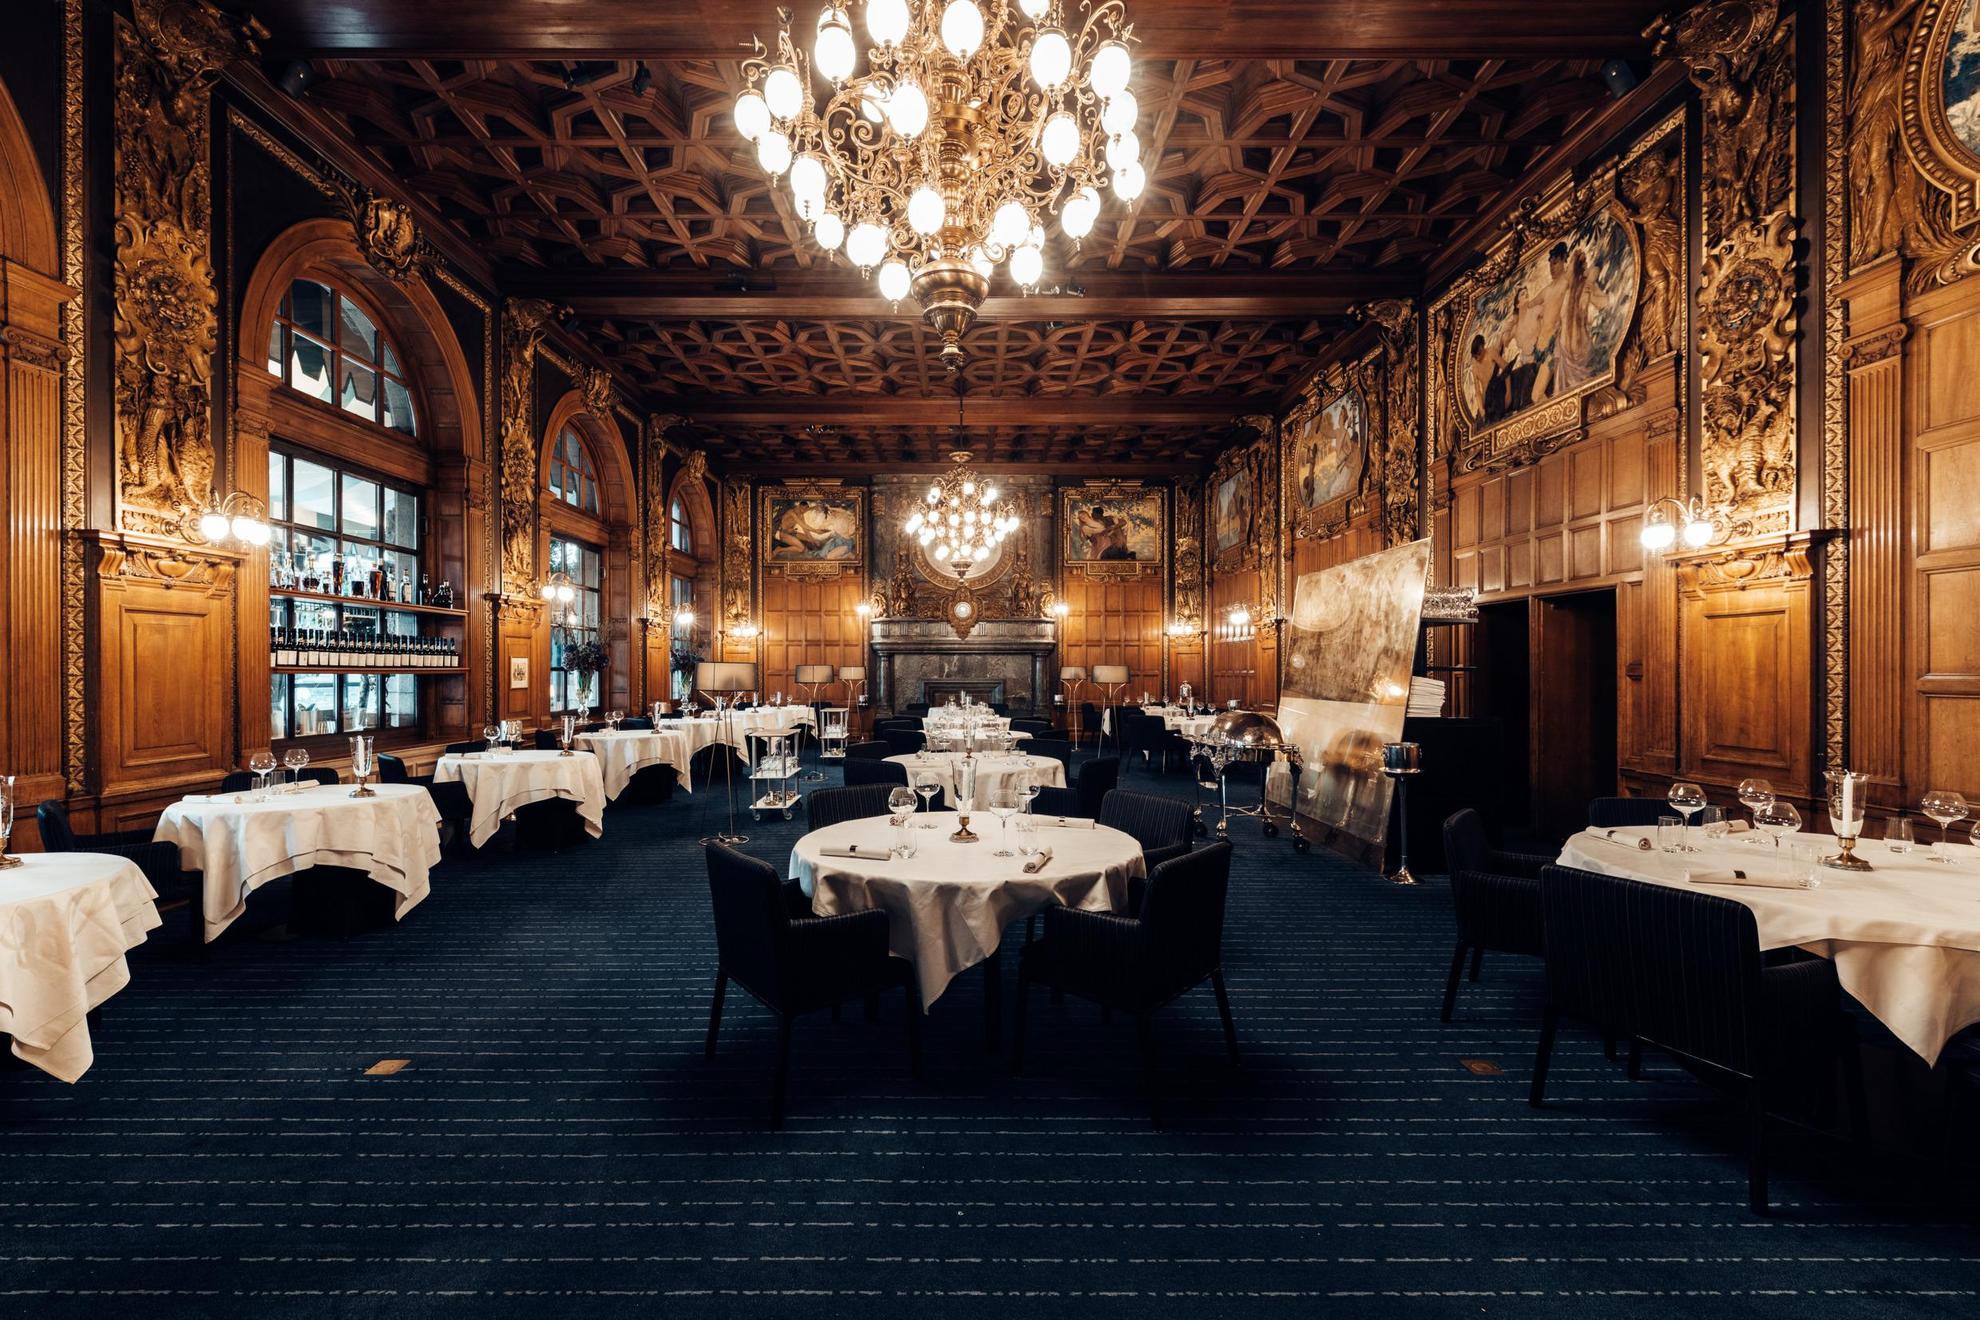 The dining room at Operakällaren with wooden walls and chandeliers.